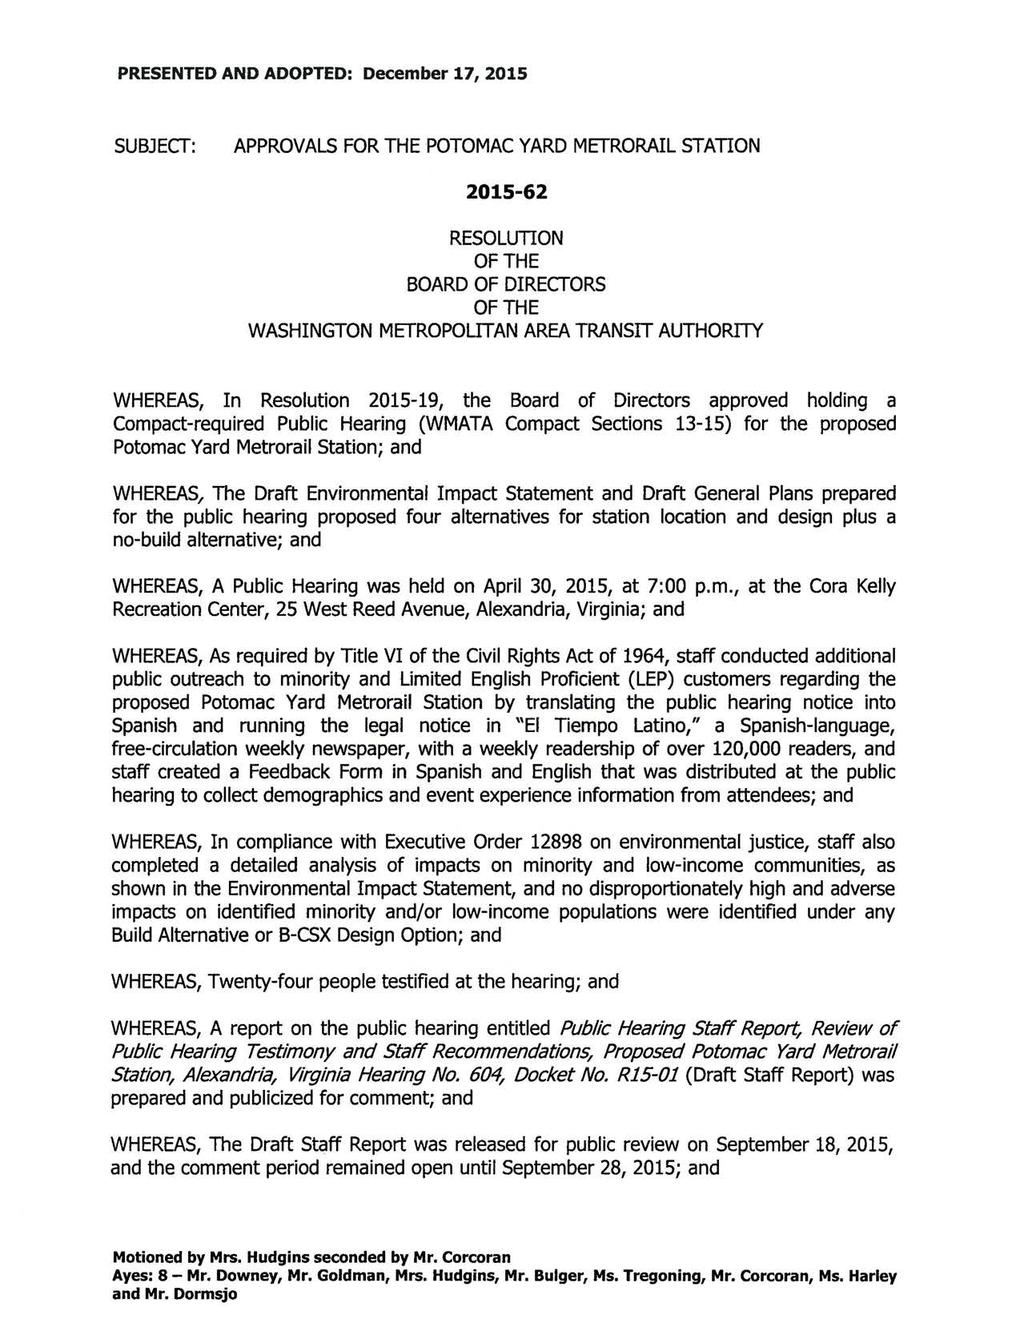 PRESENTED AND ADOPTED: December 17, 2015 SUBJECT: APPROVALS FOR THE POTOMAC YARD METRORAIL STATION 2015-62 RESOLUTION OF THE BOARD OF DIRECTORS OF THE WASHINGTON METROPOLITAN AREA TRANSIT AUTHORITY